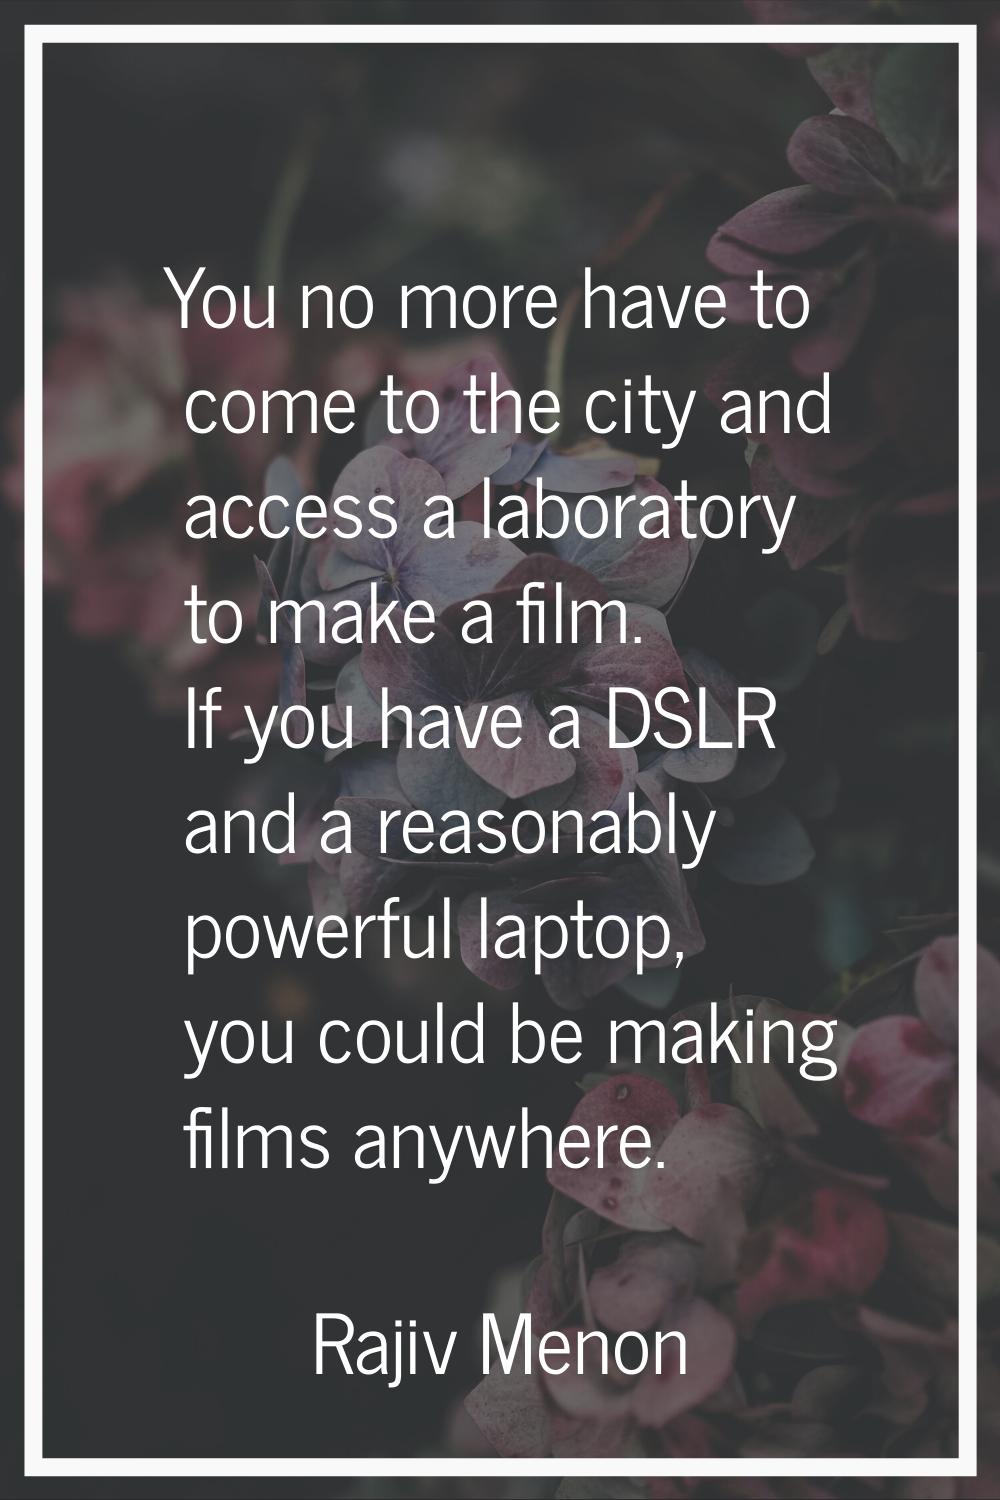 You no more have to come to the city and access a laboratory to make a film. If you have a DSLR and